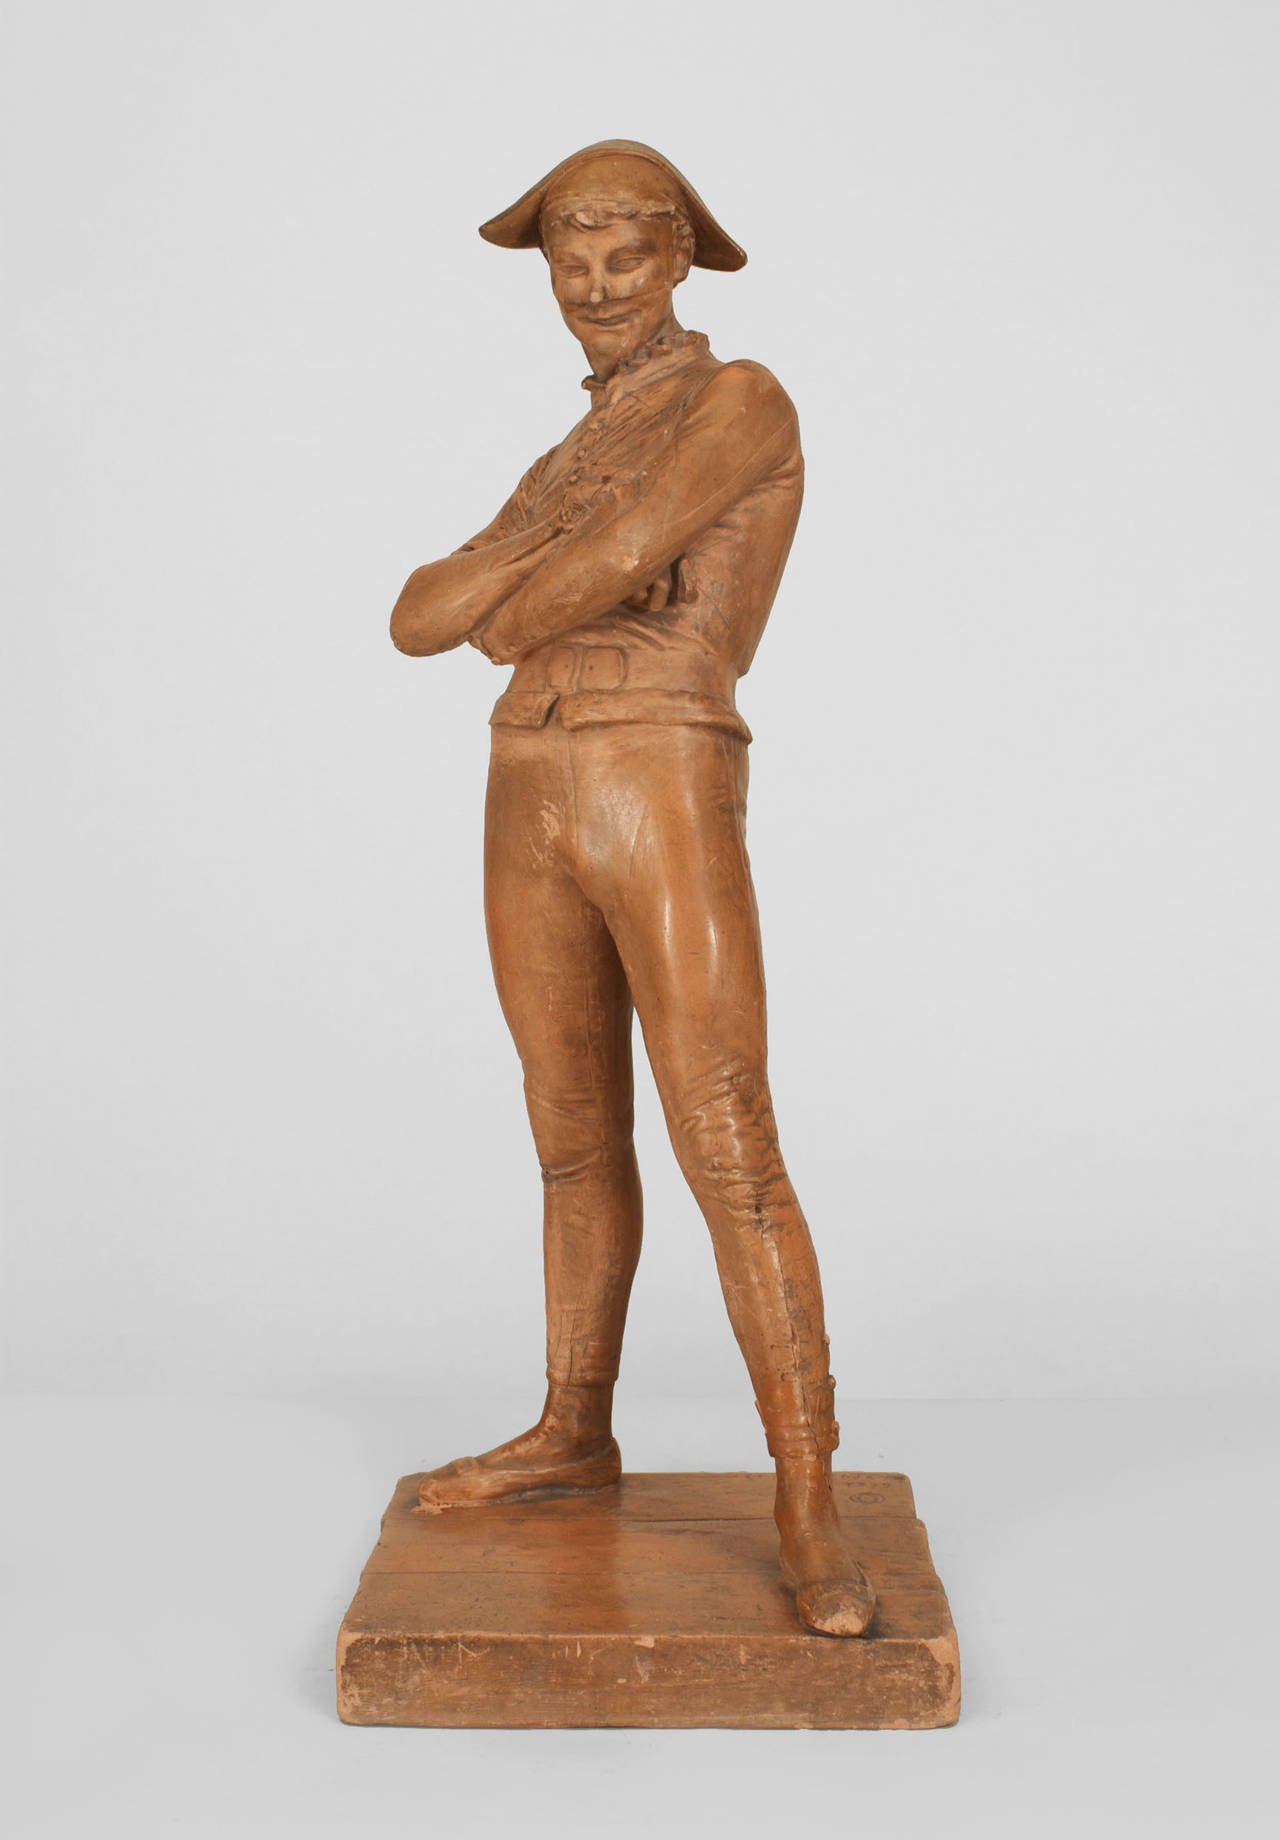 French Victorian (19th Cent) terra-cotta standing figure of a harlequin posing with arms crossed (signed ST. MARCEAUX 1879)
